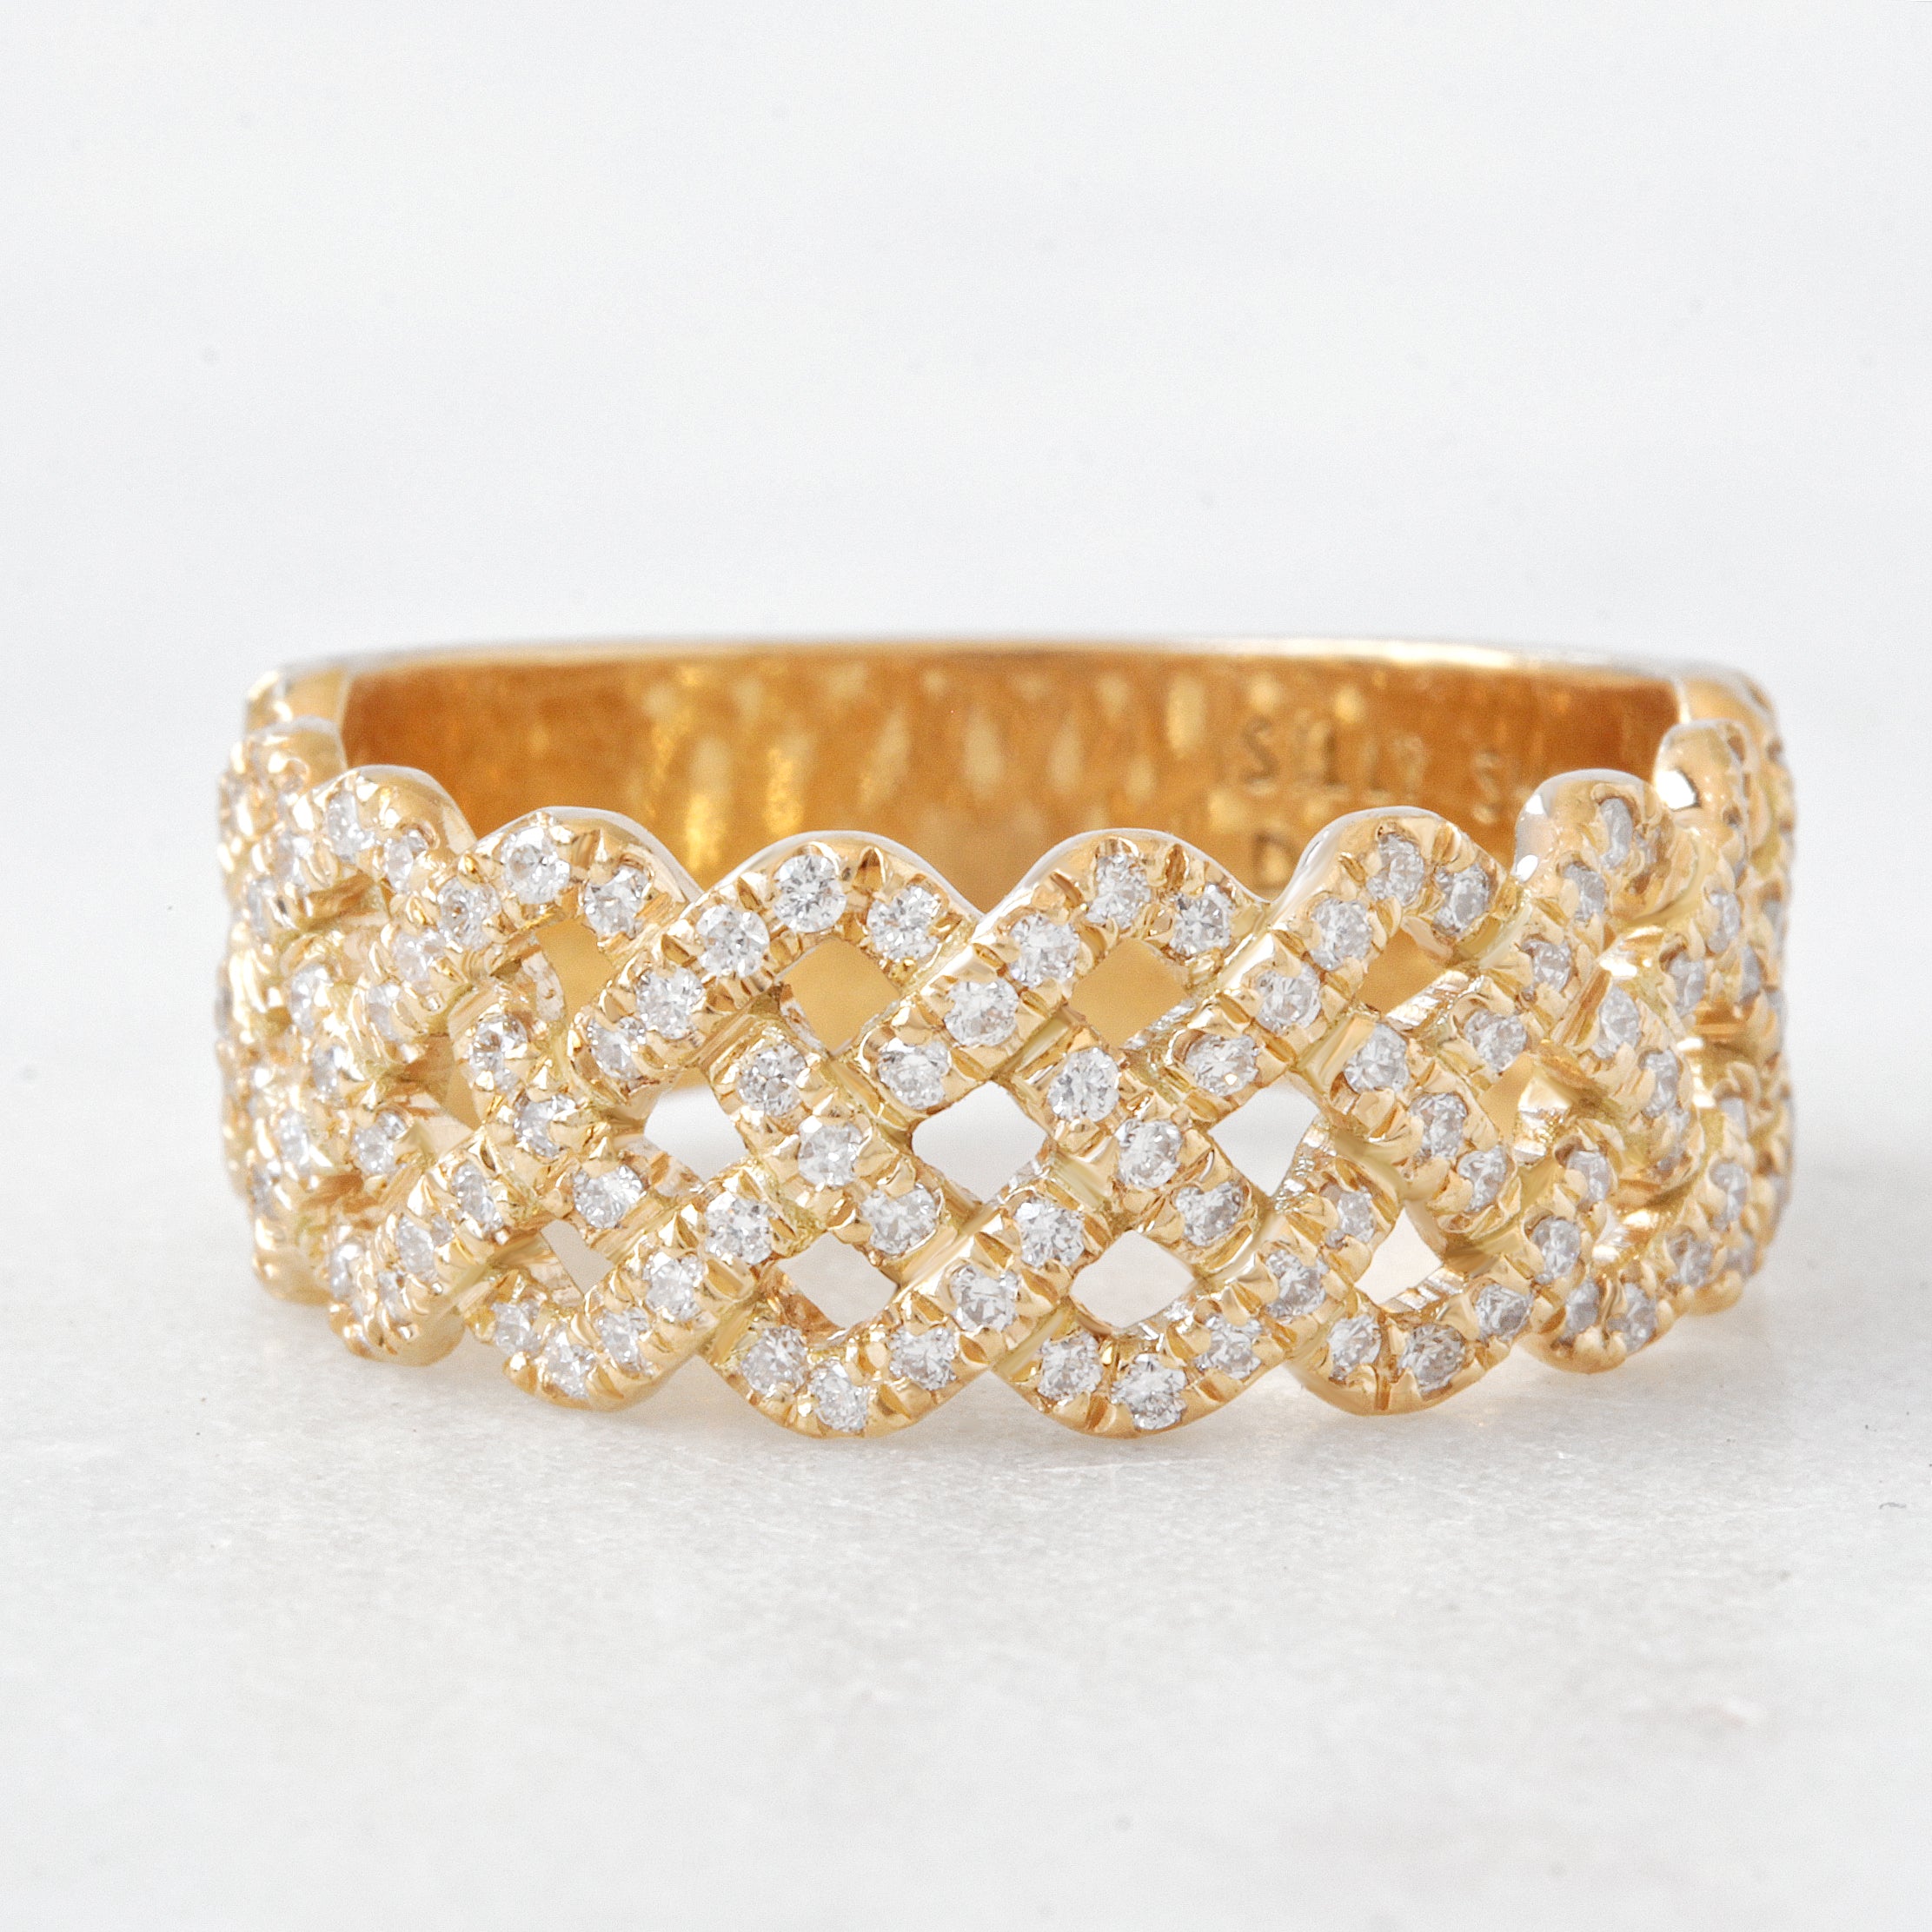 Braided Wide Diamond Anniversary Band, 18K, Yellow Gold, Size 8.5, READY TO SHIP!